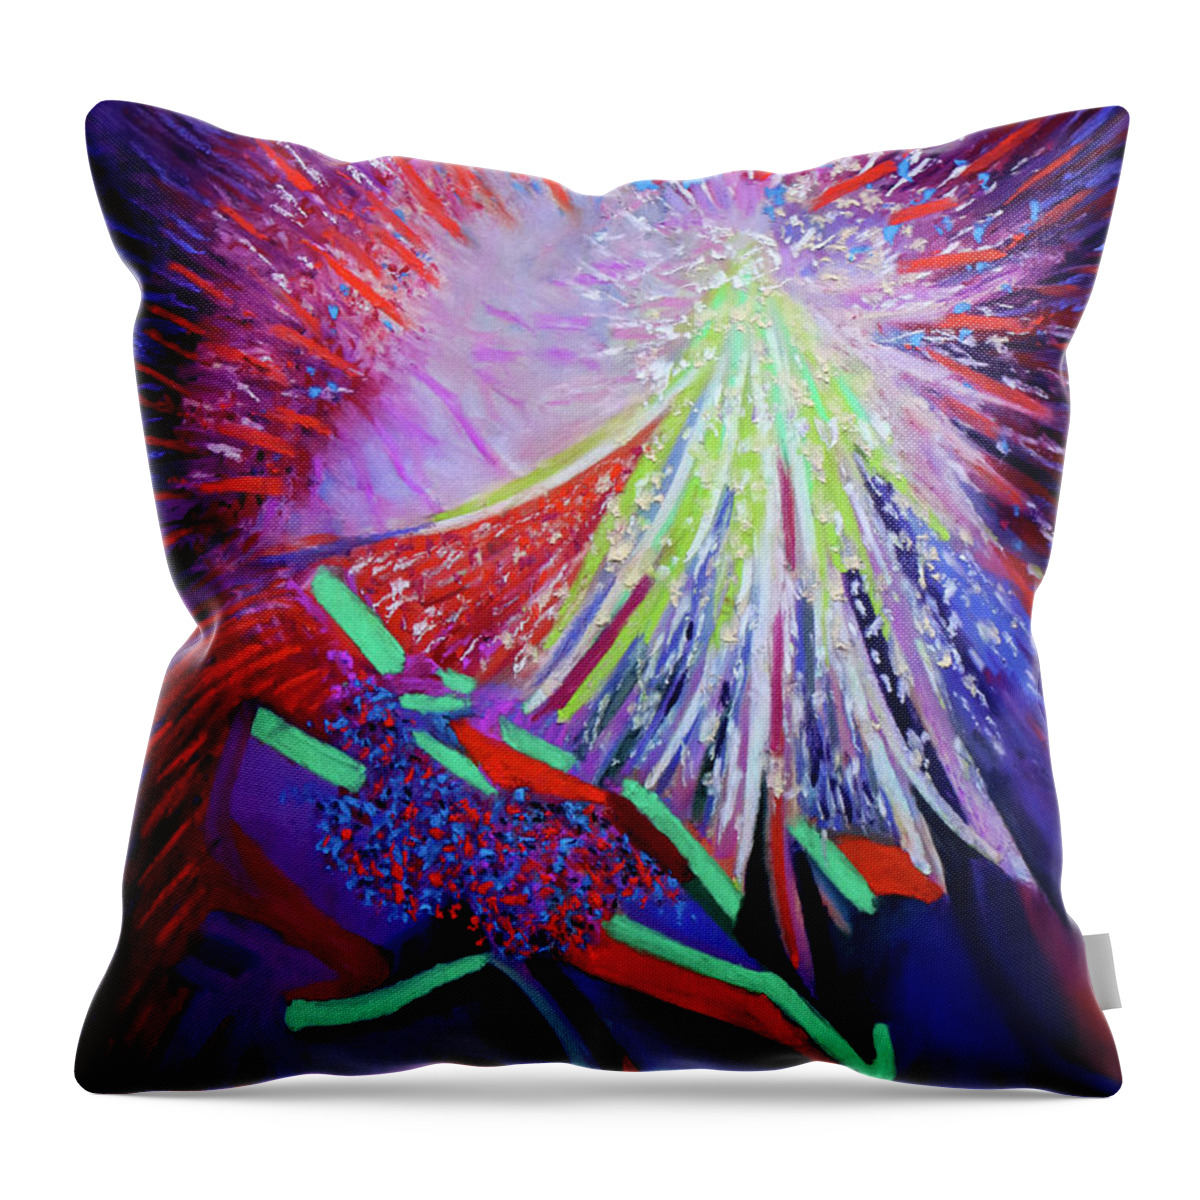  Throw Pillow featuring the painting Too Tired to Sleep by Polly Castor